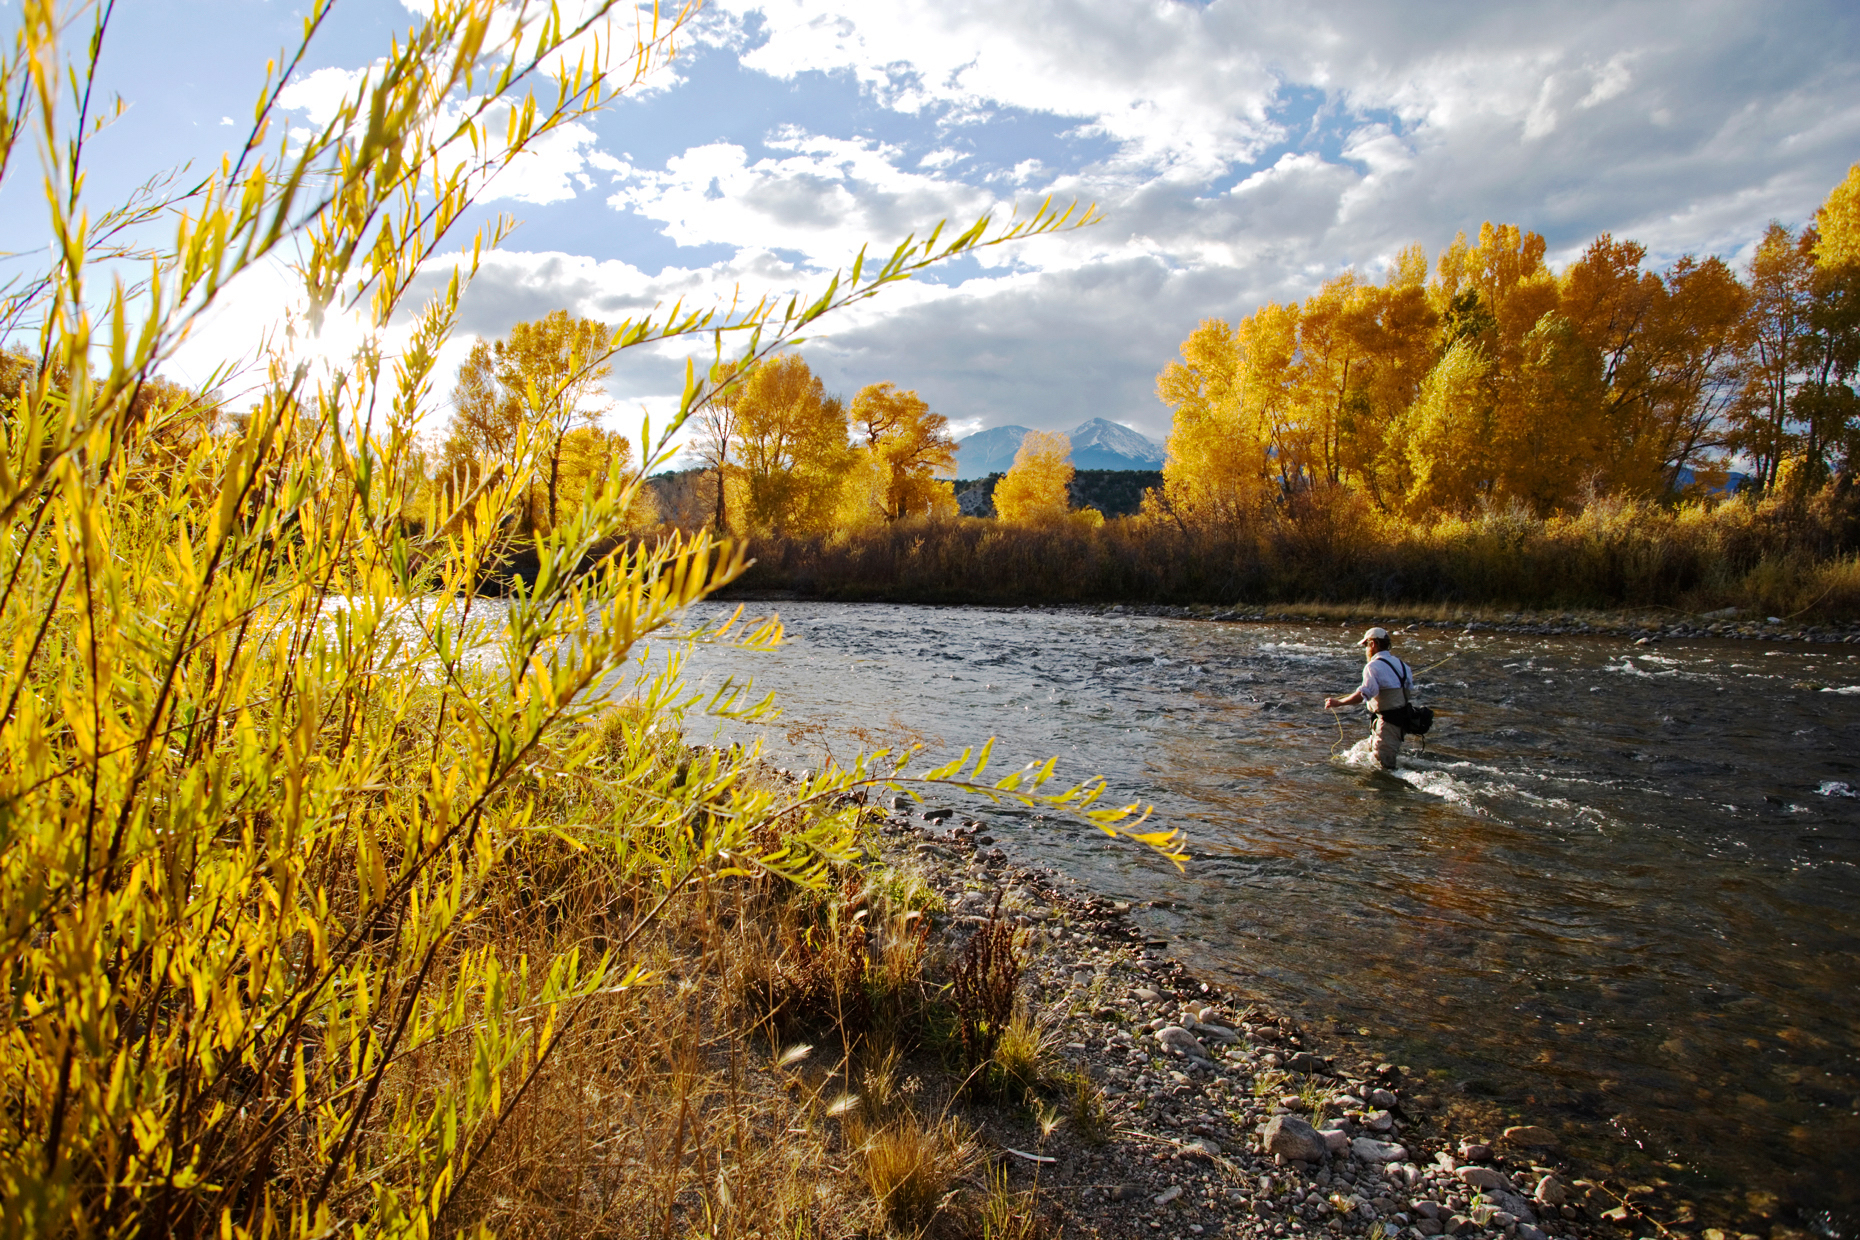 Fly fisherman casting upstream along the Arkansas River with the Colorado Rocky Mountains in the background. Autumn has turned the aspen tree leaves and grasses golden against the late afternoon sun.